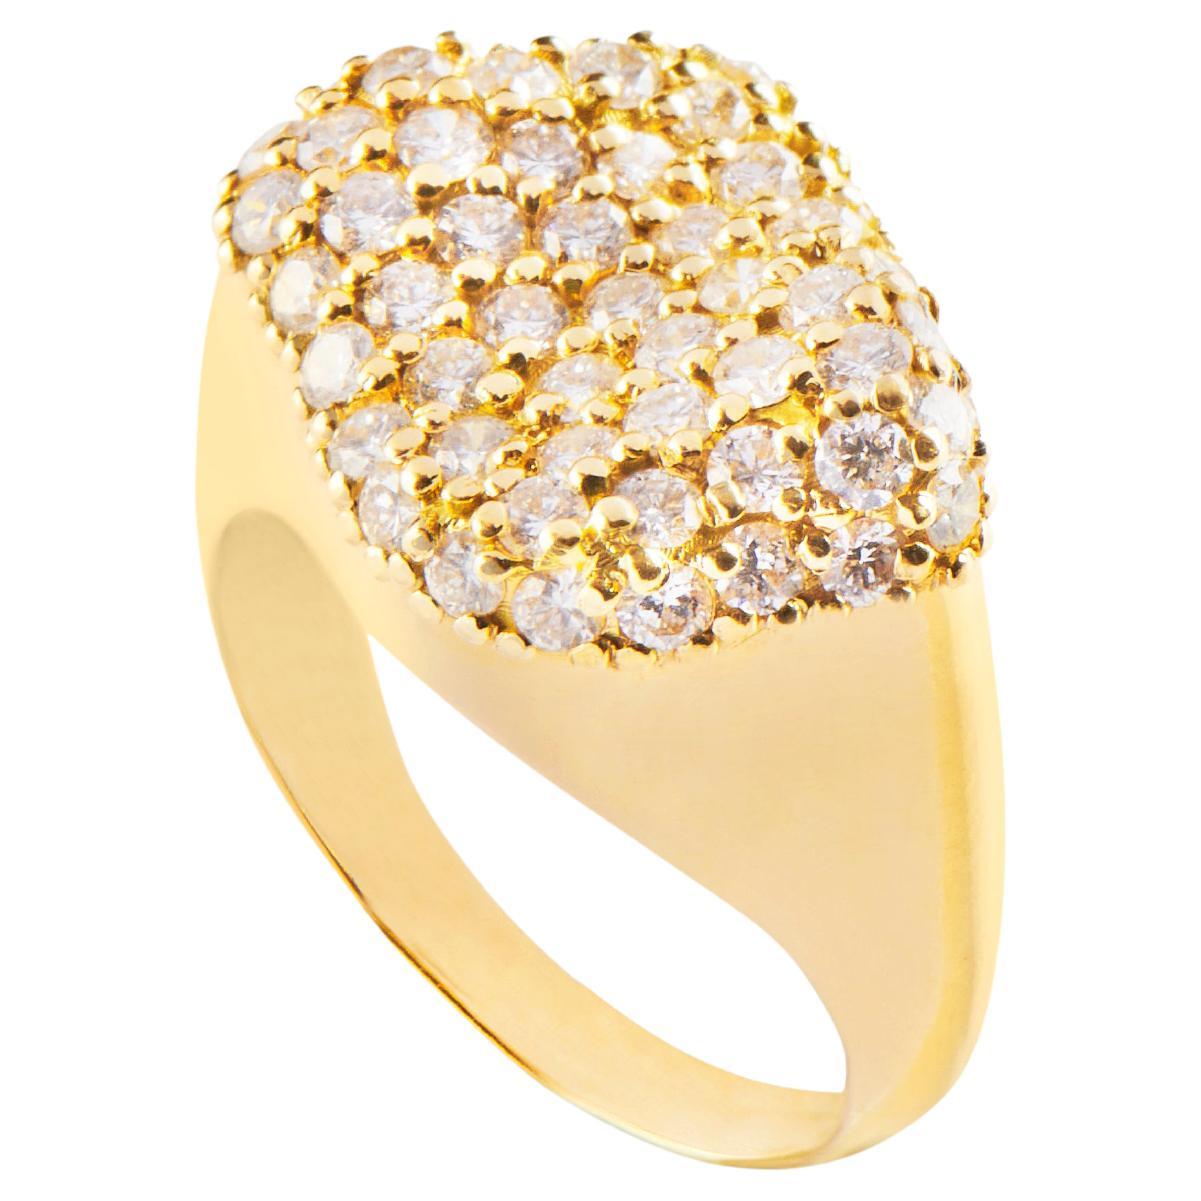 Ring in Yellow Gold and 1.37 Carats of Diamonds